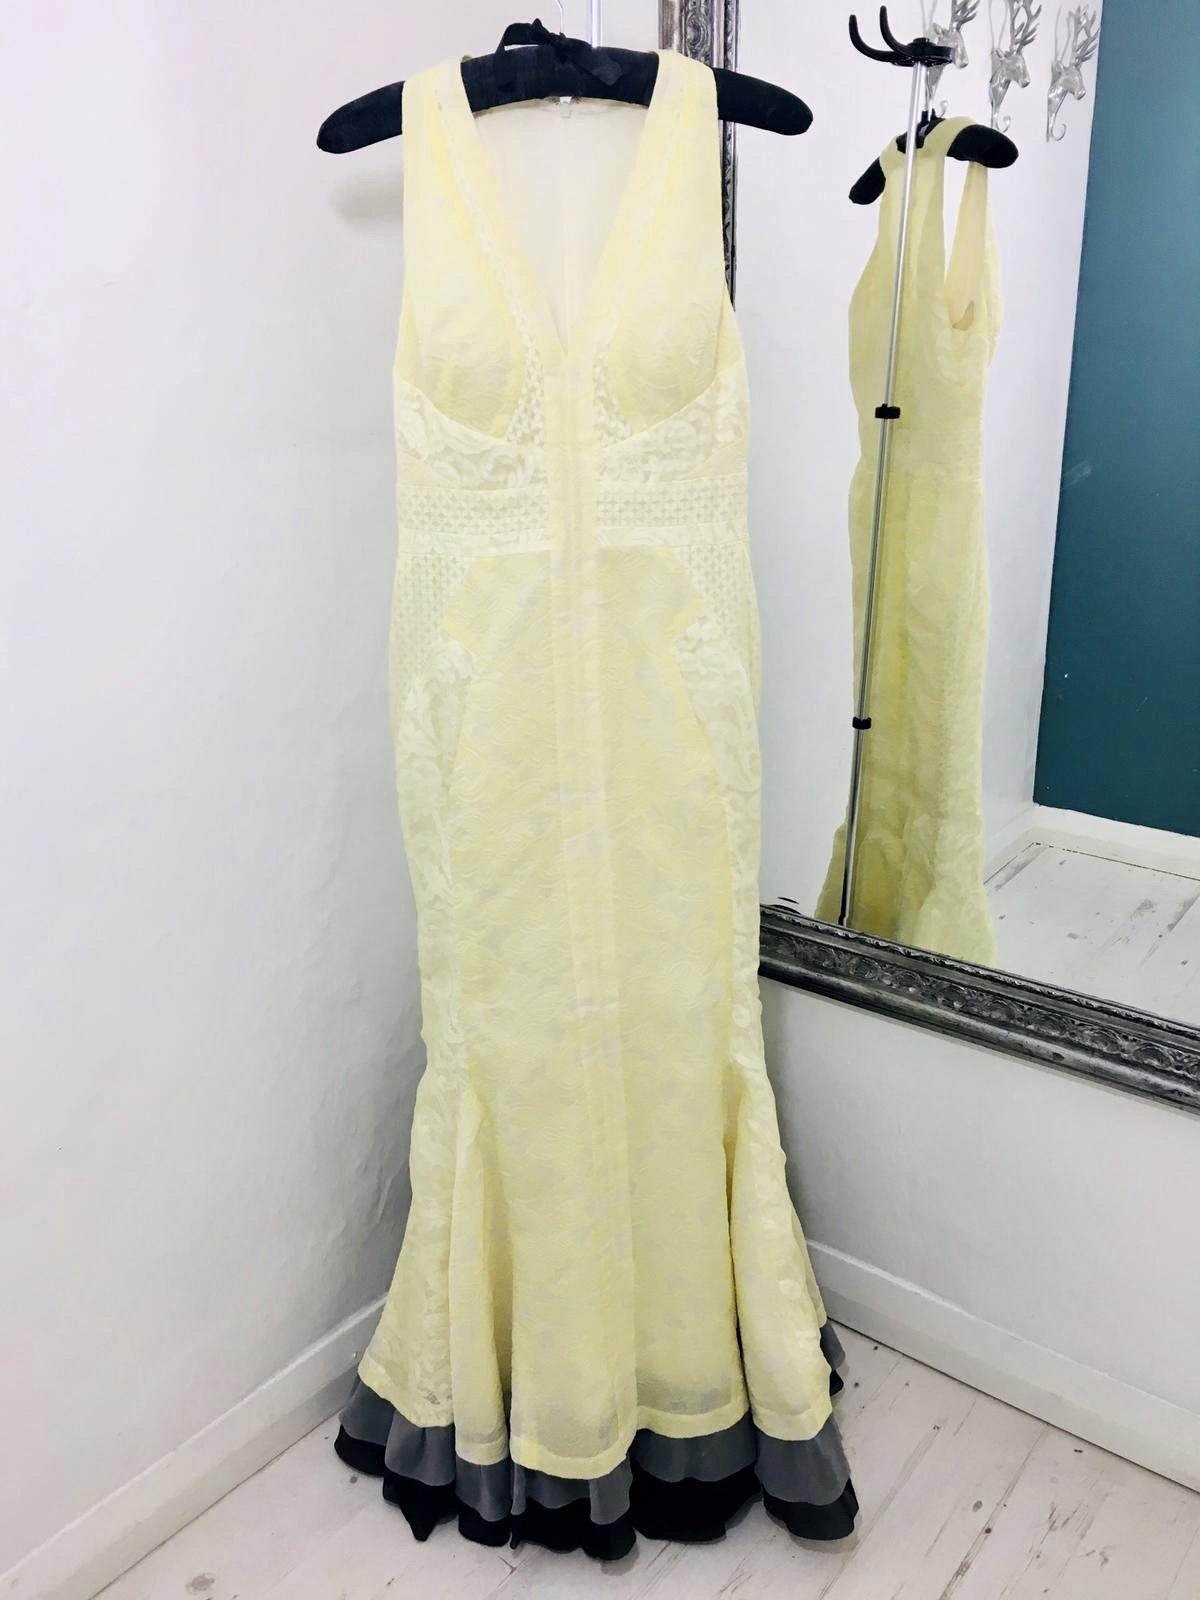 J.Mendel Silk Evening Gown

Pale yellow/lemon with a brocade detail pattern and lace. Slight plunge V neck. Figure hugging with Fish tail flair to the bottom of the dress showing contrasting colours of black and grey silk. Zipper back closure.